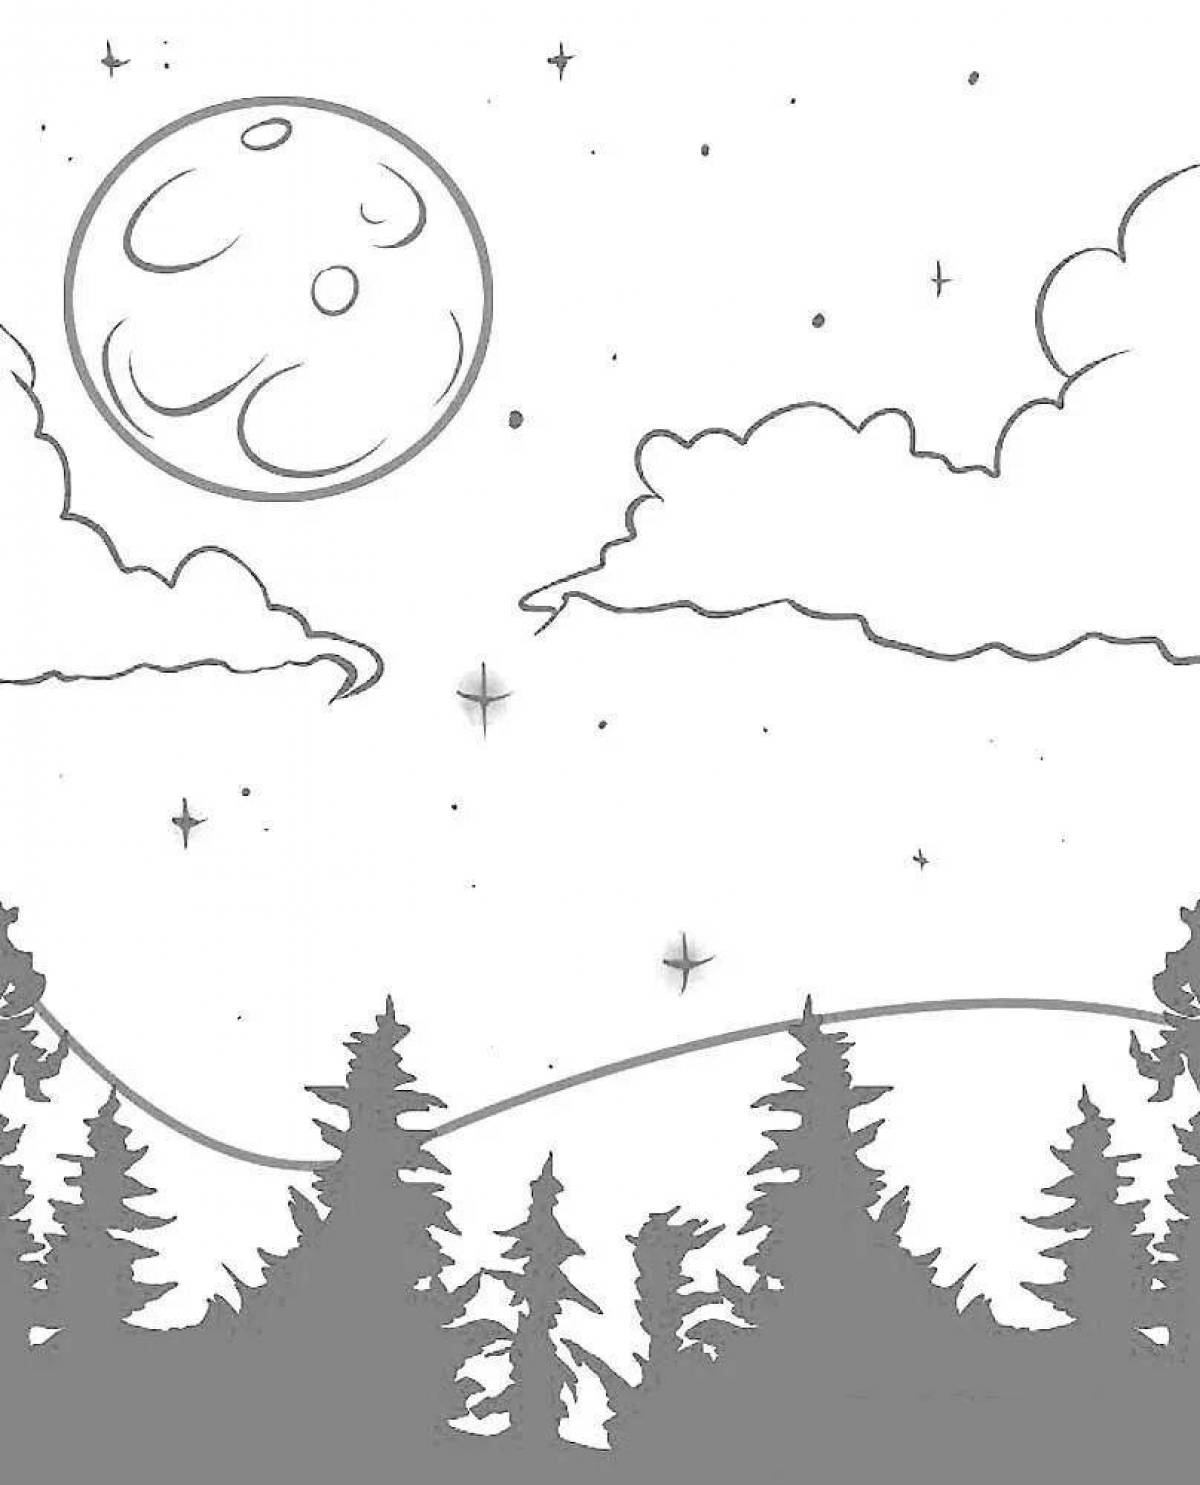 Awesome night sky coloring page